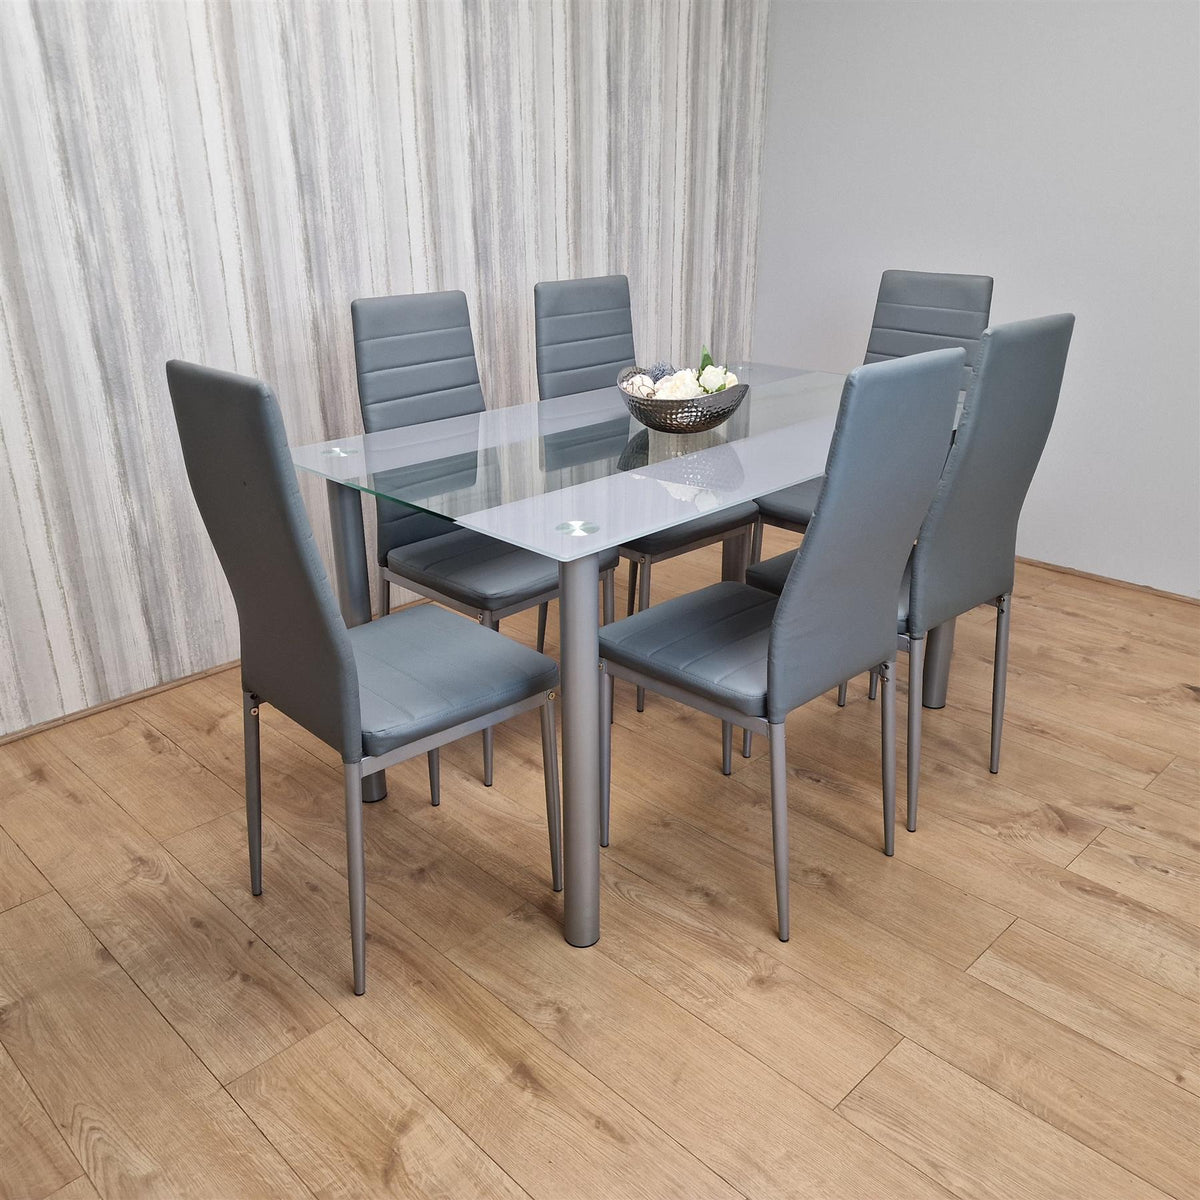 Dining Table Set with 6 Chairs Dining Room, and Kitchen table set of 6